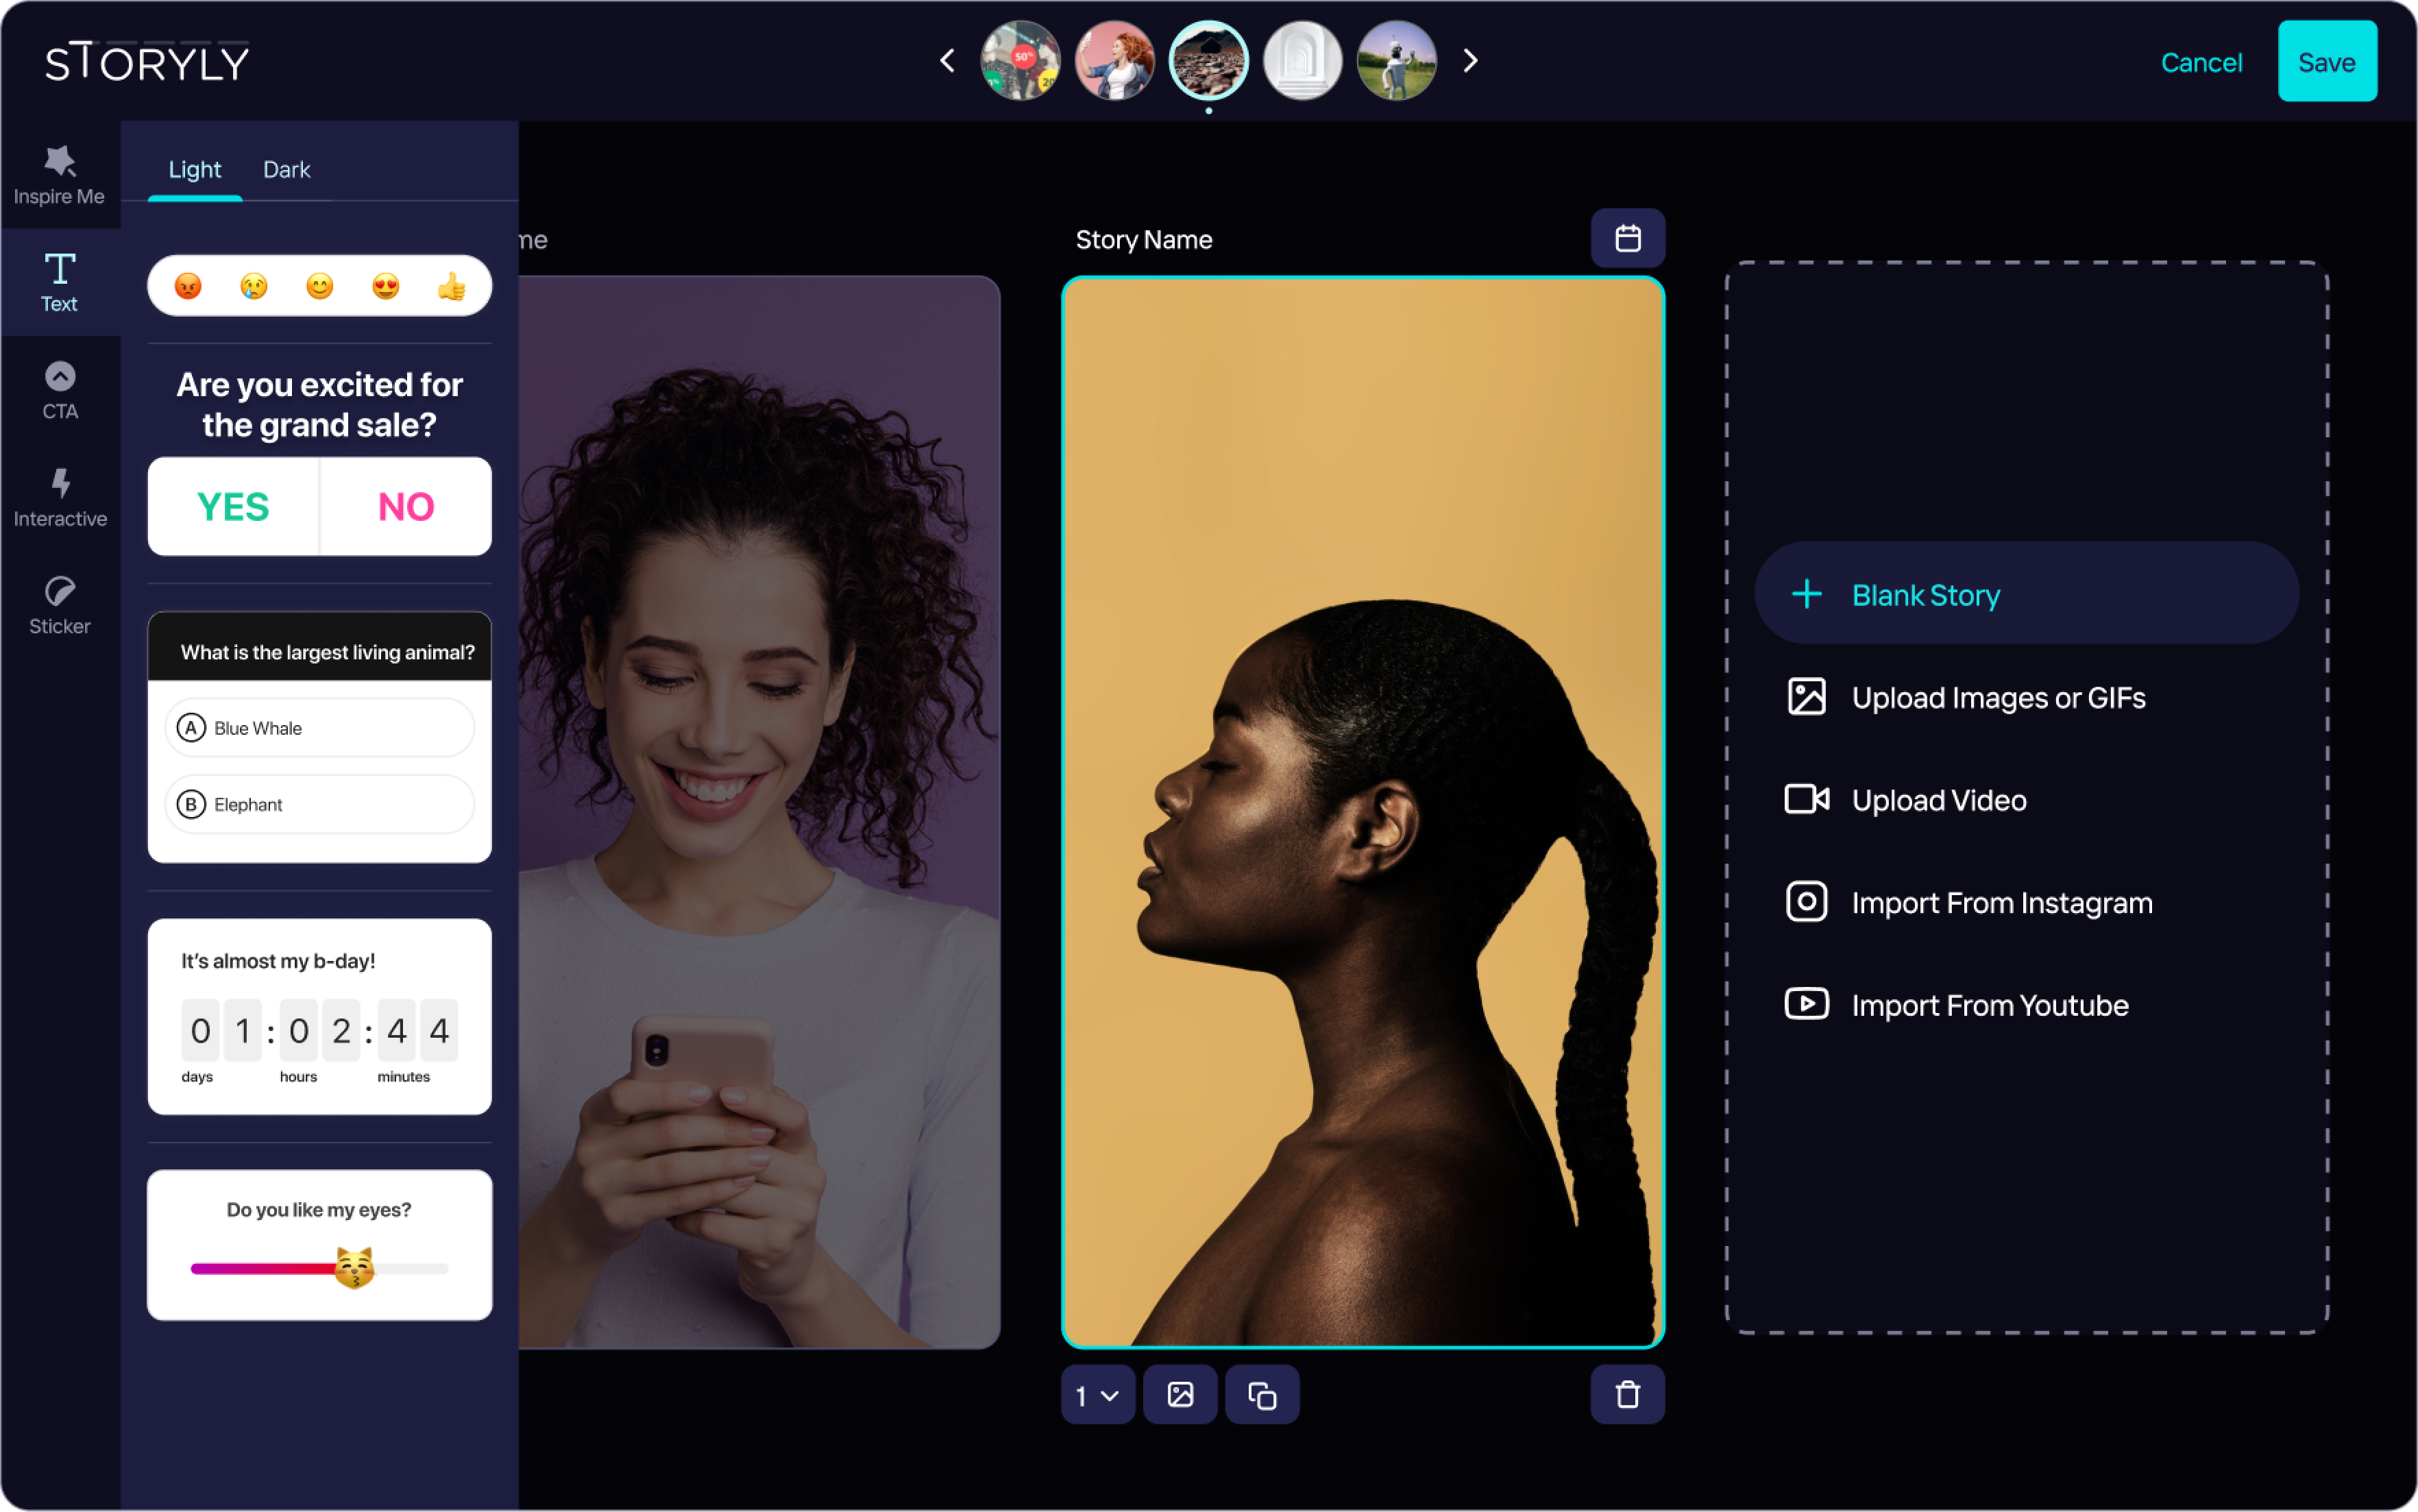 Storyly Studio enables you to create your in-app stories from scratch or automate story sharing with engaging templates. You can add interactive stickers, CTA buttons, or product tags to your stories.